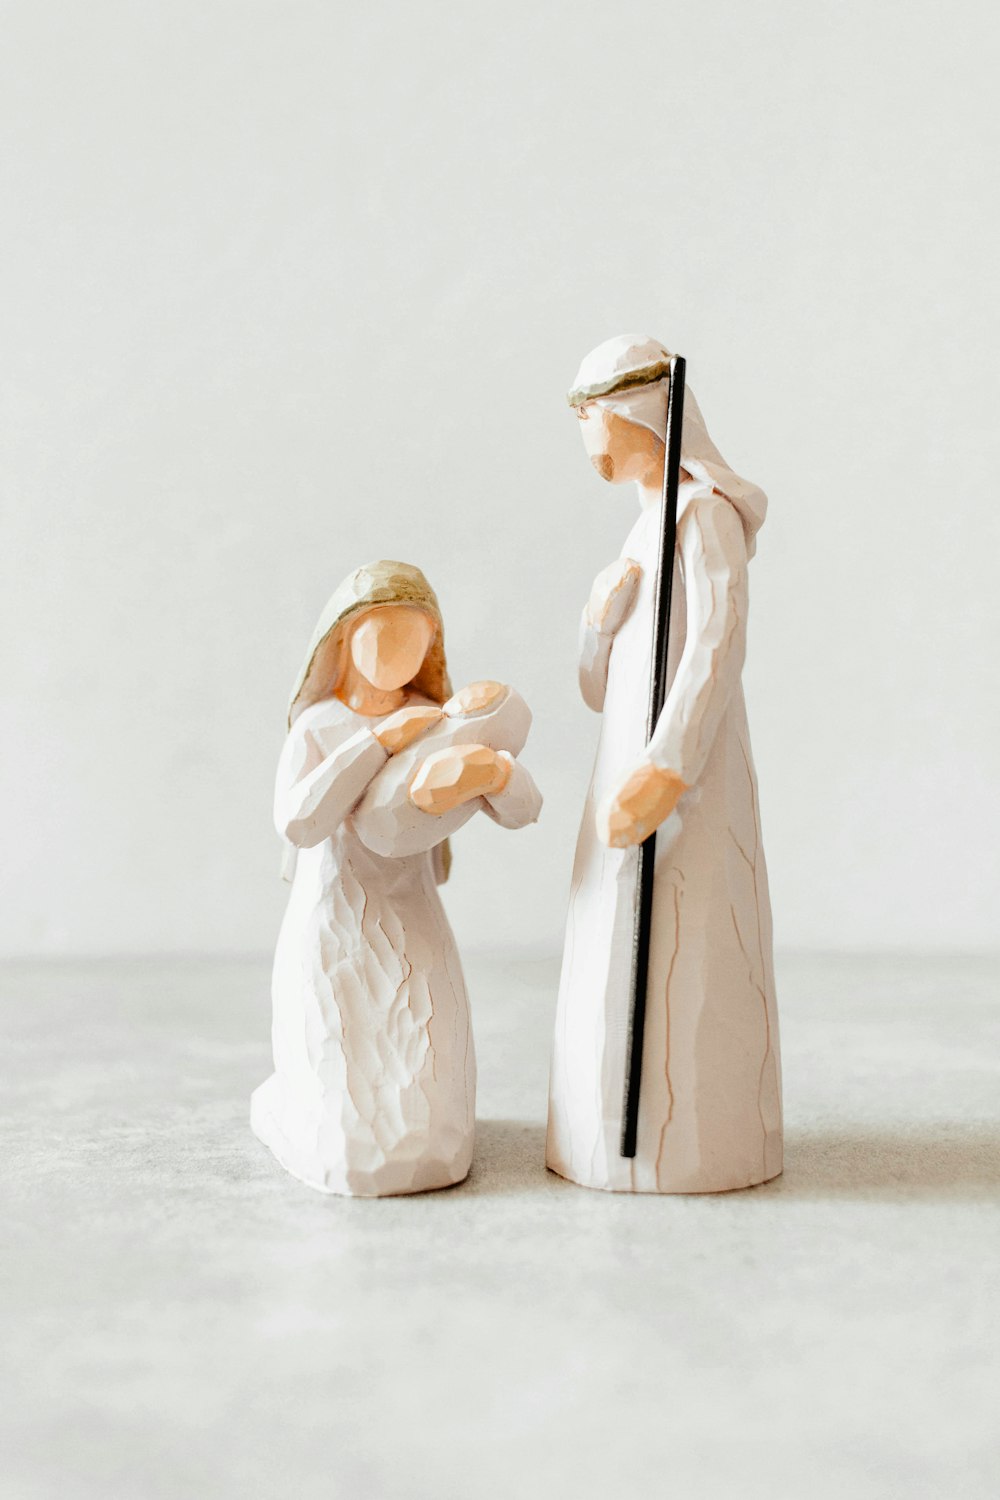 a figurine of a man and a woman holding a cross